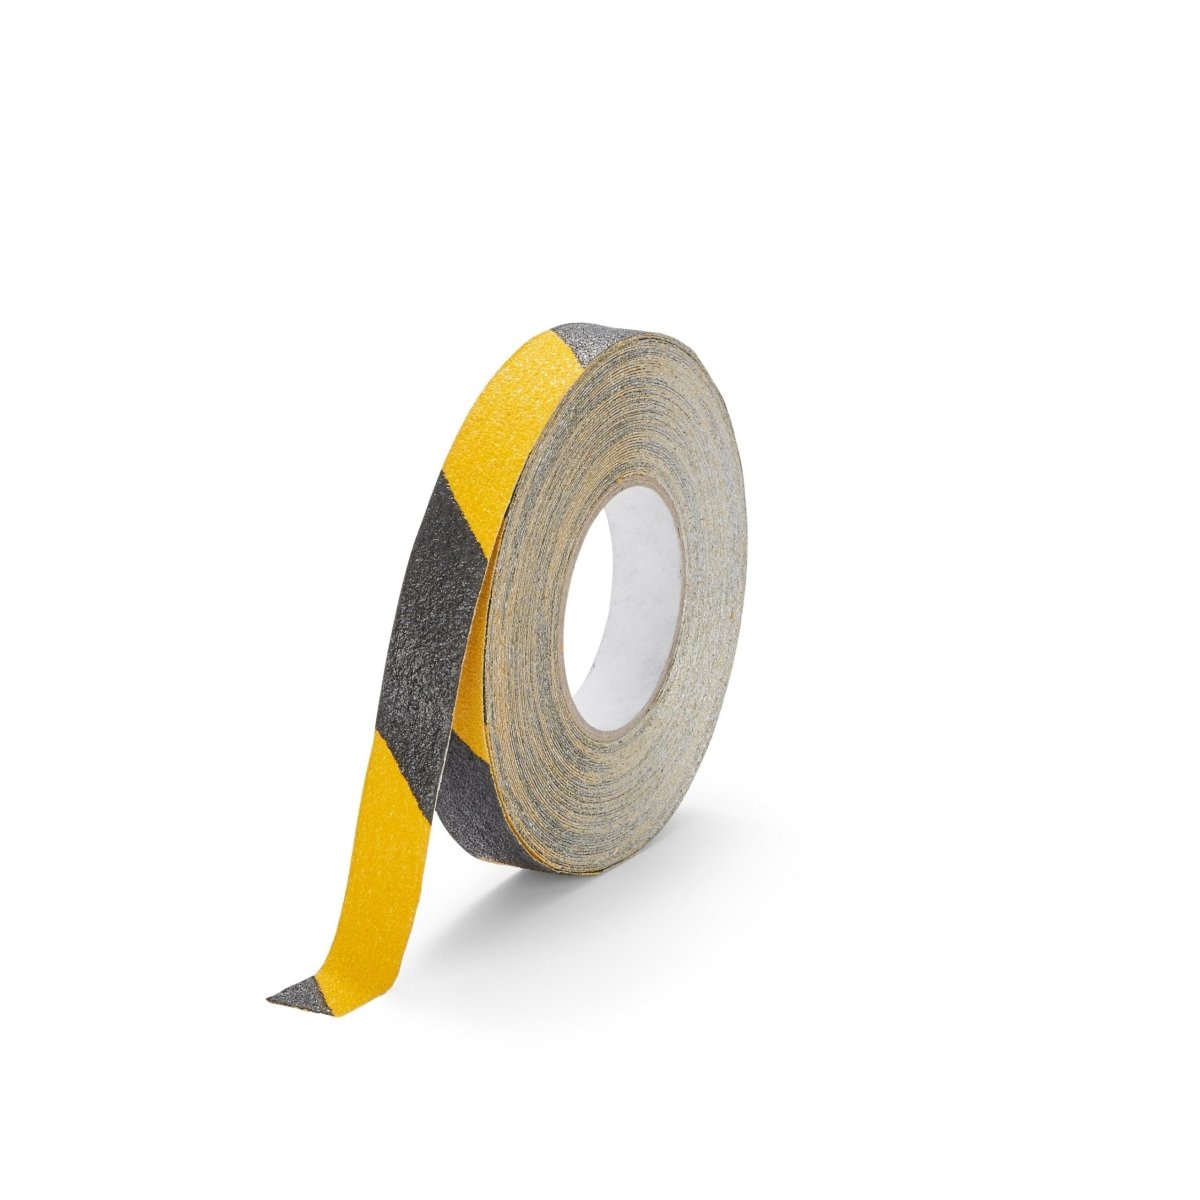 Hazard Conformable Traction Grade Anti Slip Tape Rolls - Slips Away - H3406D-Black-Yellow-Conformable-Safety-Grip-25mm -